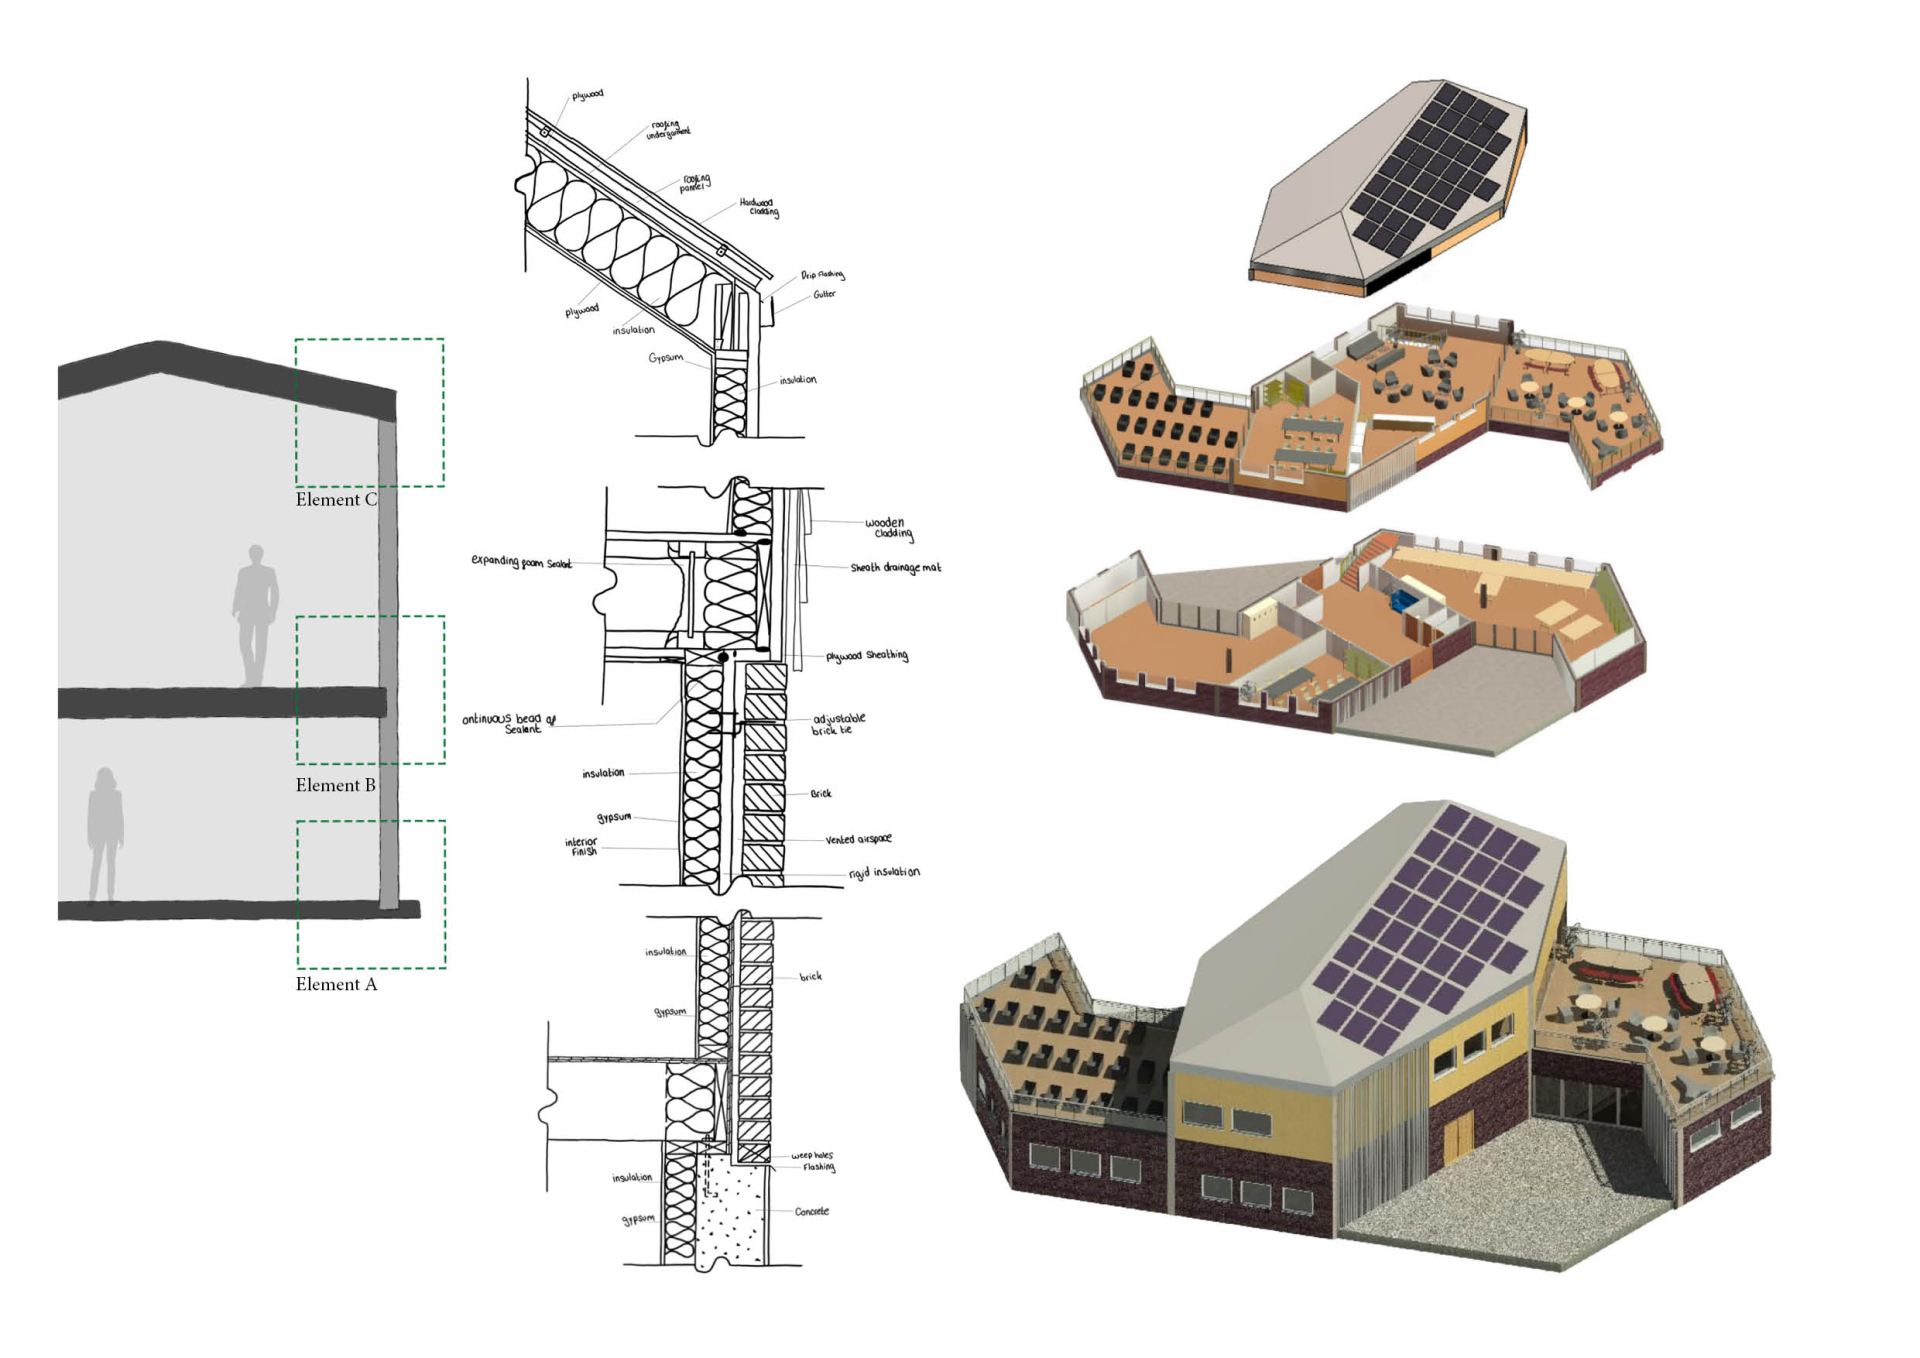 Sustainable transition hub - Construction details, Isometric model and final render